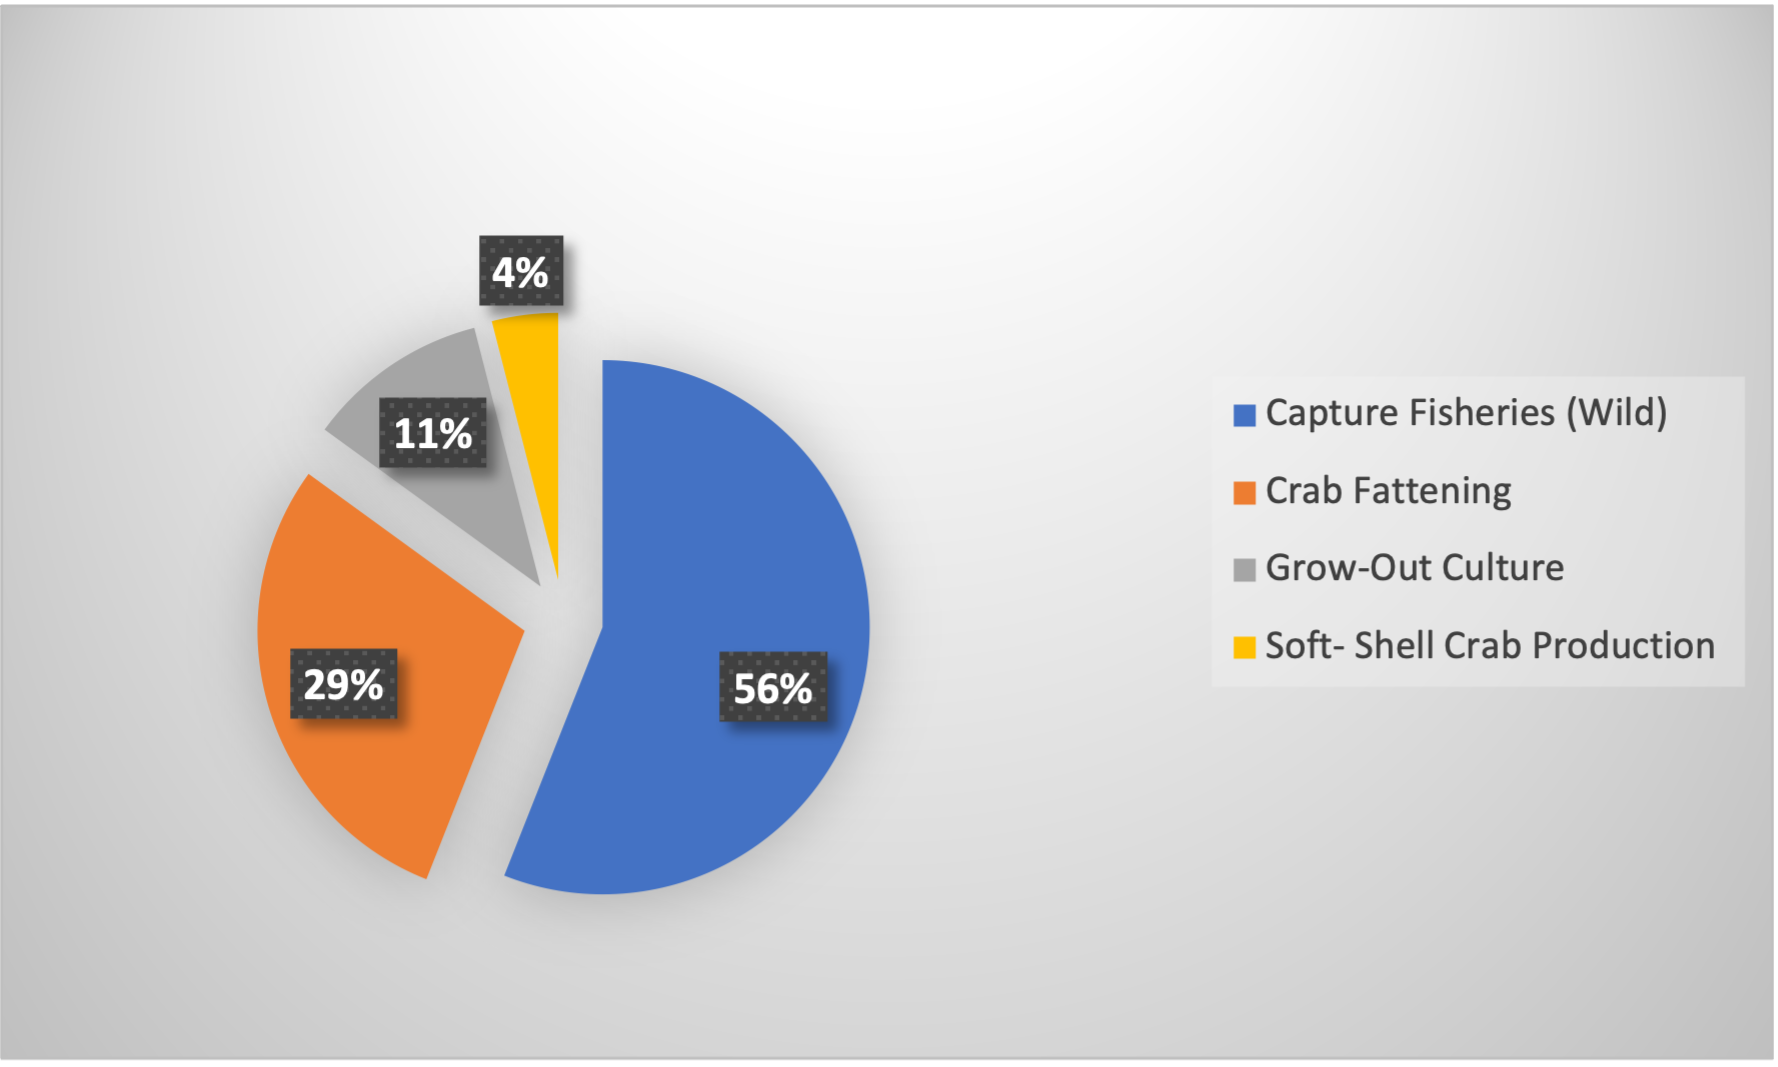 This graph shows different sectors of the mud crab fishery in Bangladesh. Capture Fisheries (wild) at 56%, crab fattening at 29%, grow-out culture at 11%, and soft-shell crab production at 4%.